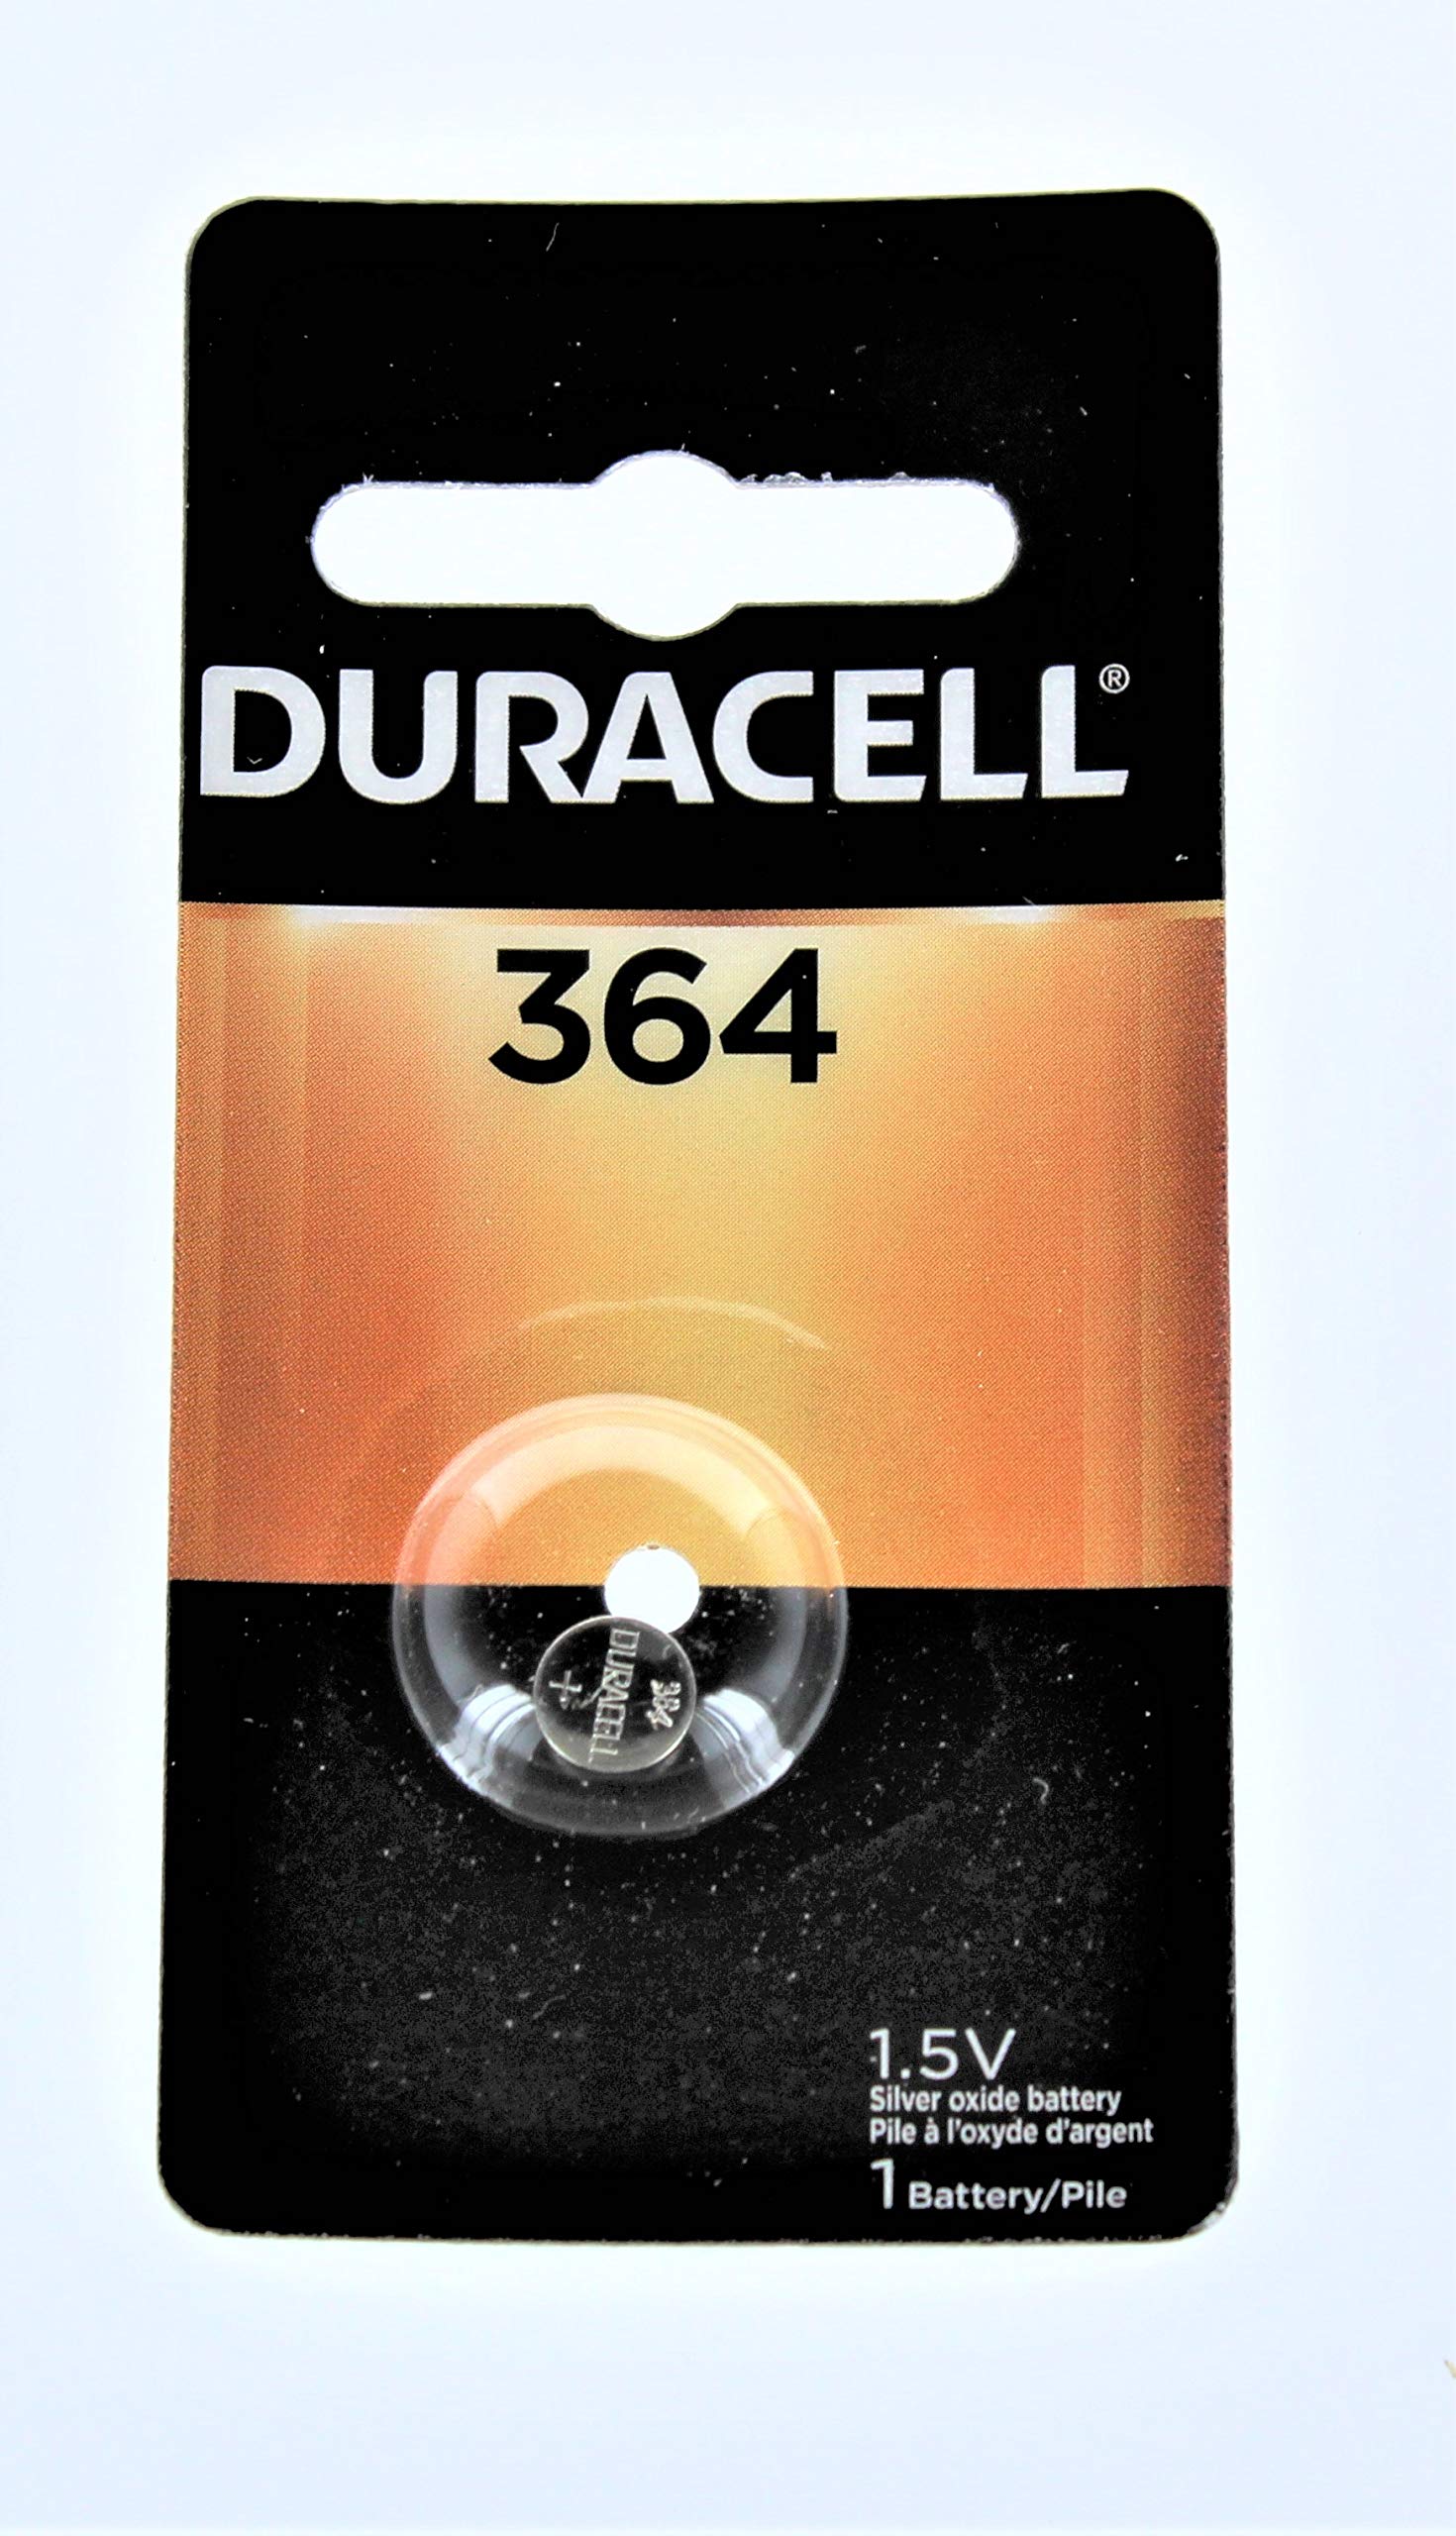 Duracell Watch And Electronic Battery 1.5 V Silver Oxide Model No. 364 Carded